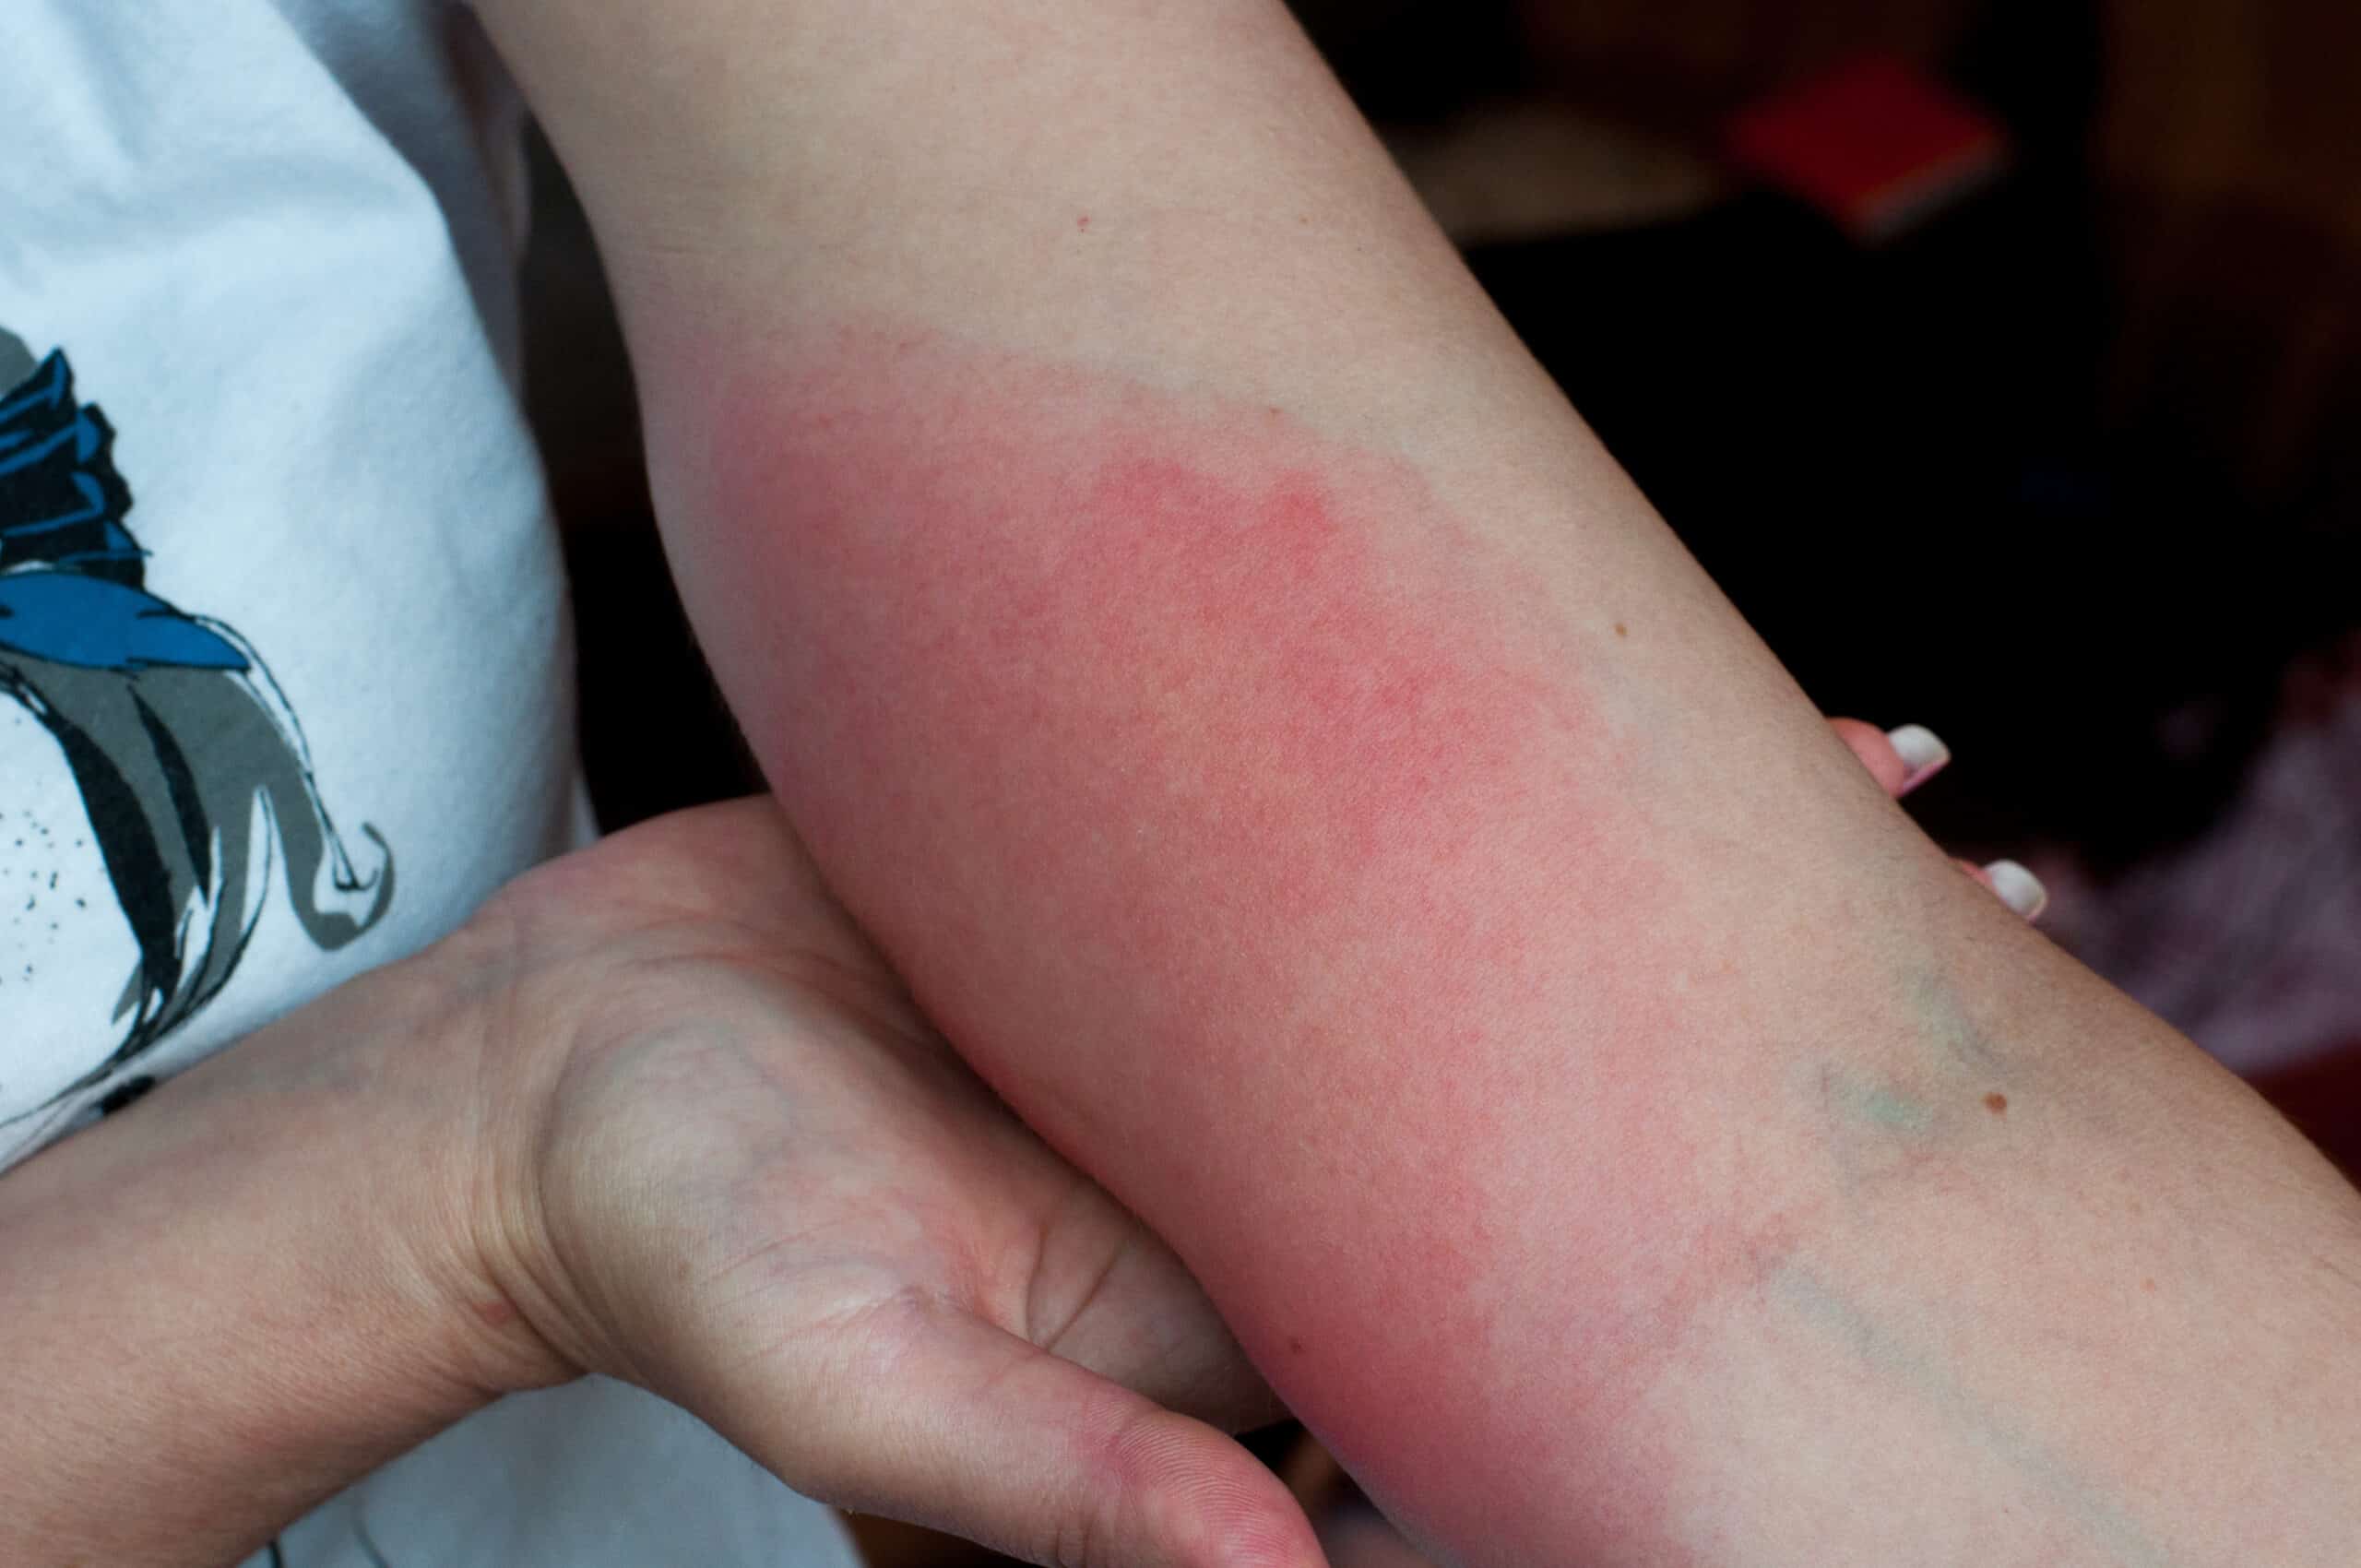 Image of a red insect sting shows an example acute inflammation